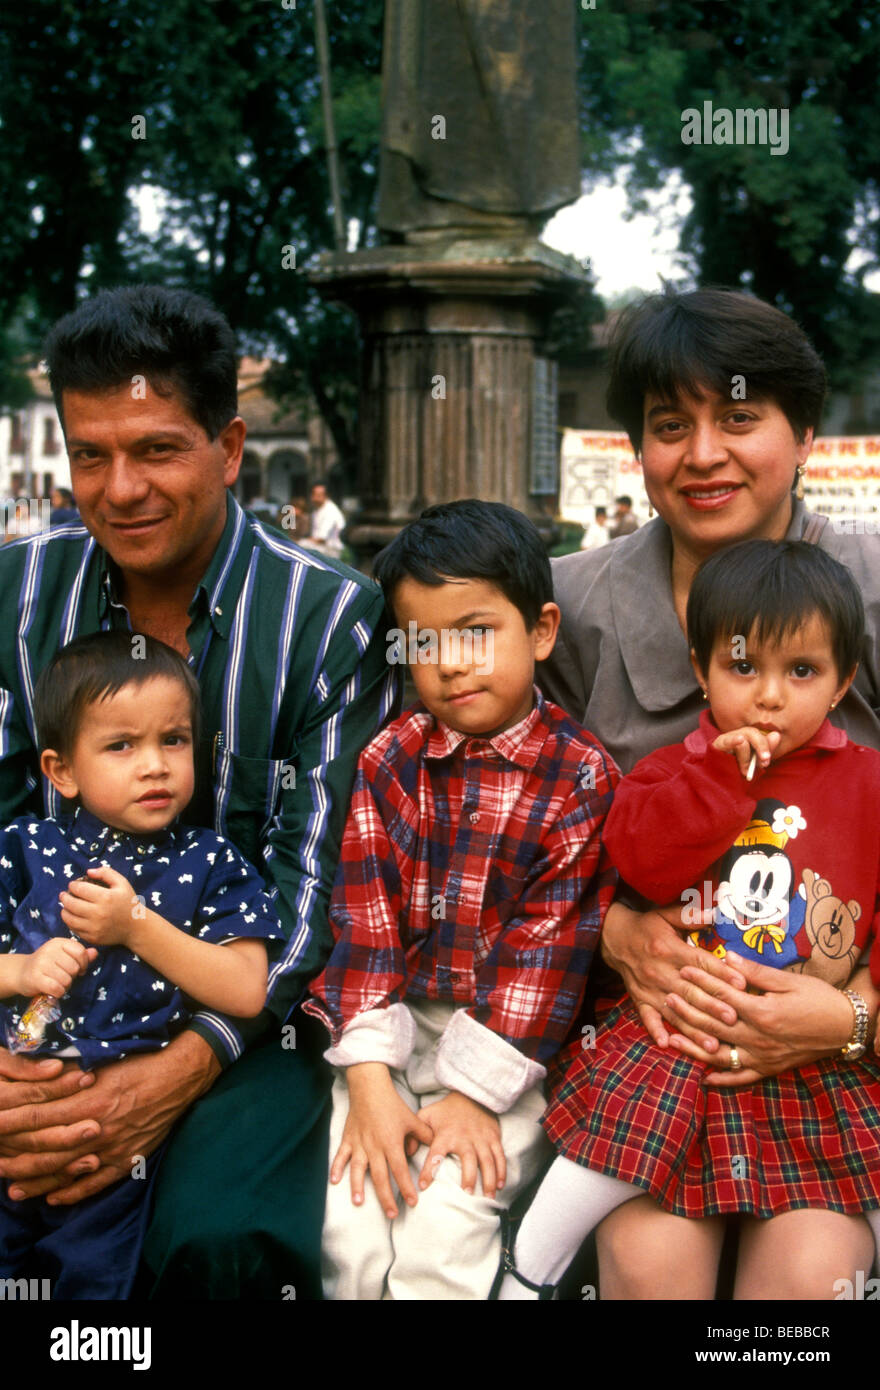 Mexicans, Mexican people, Mexican family, mother, father, children, tourists, Plaza Vasco de Quiroga, town of Patzcuaro, Michoacan State, Mexico Stock Photo